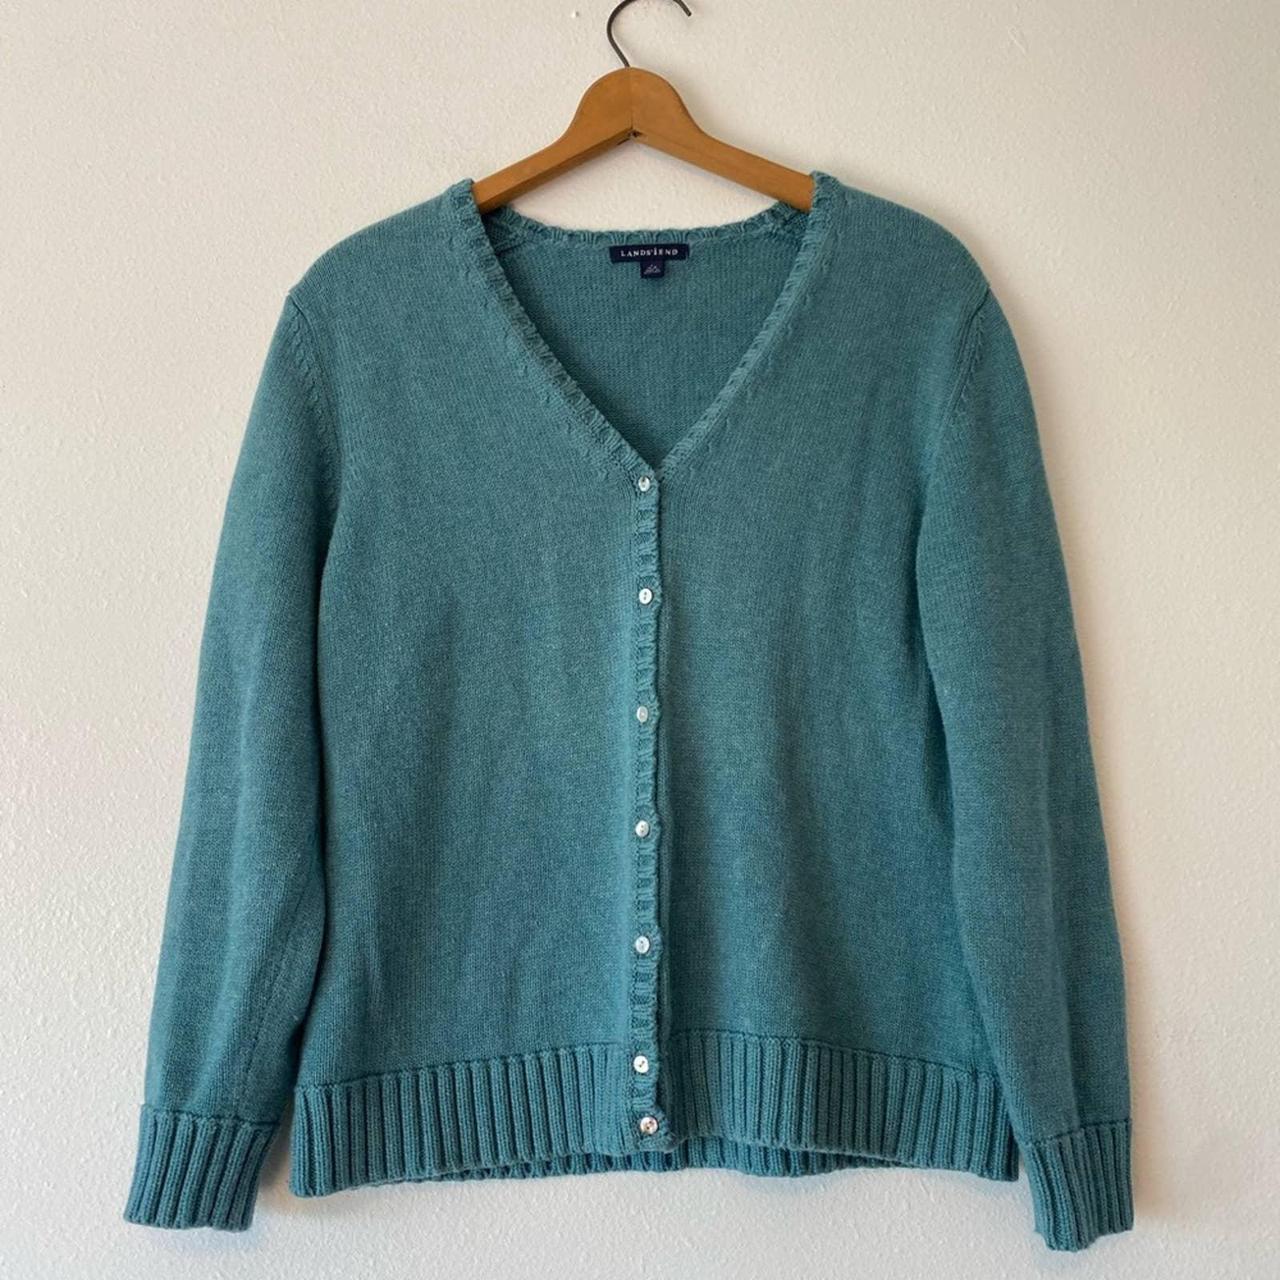 Super cute Land’s End cardigan in the most gorgeous... - Depop